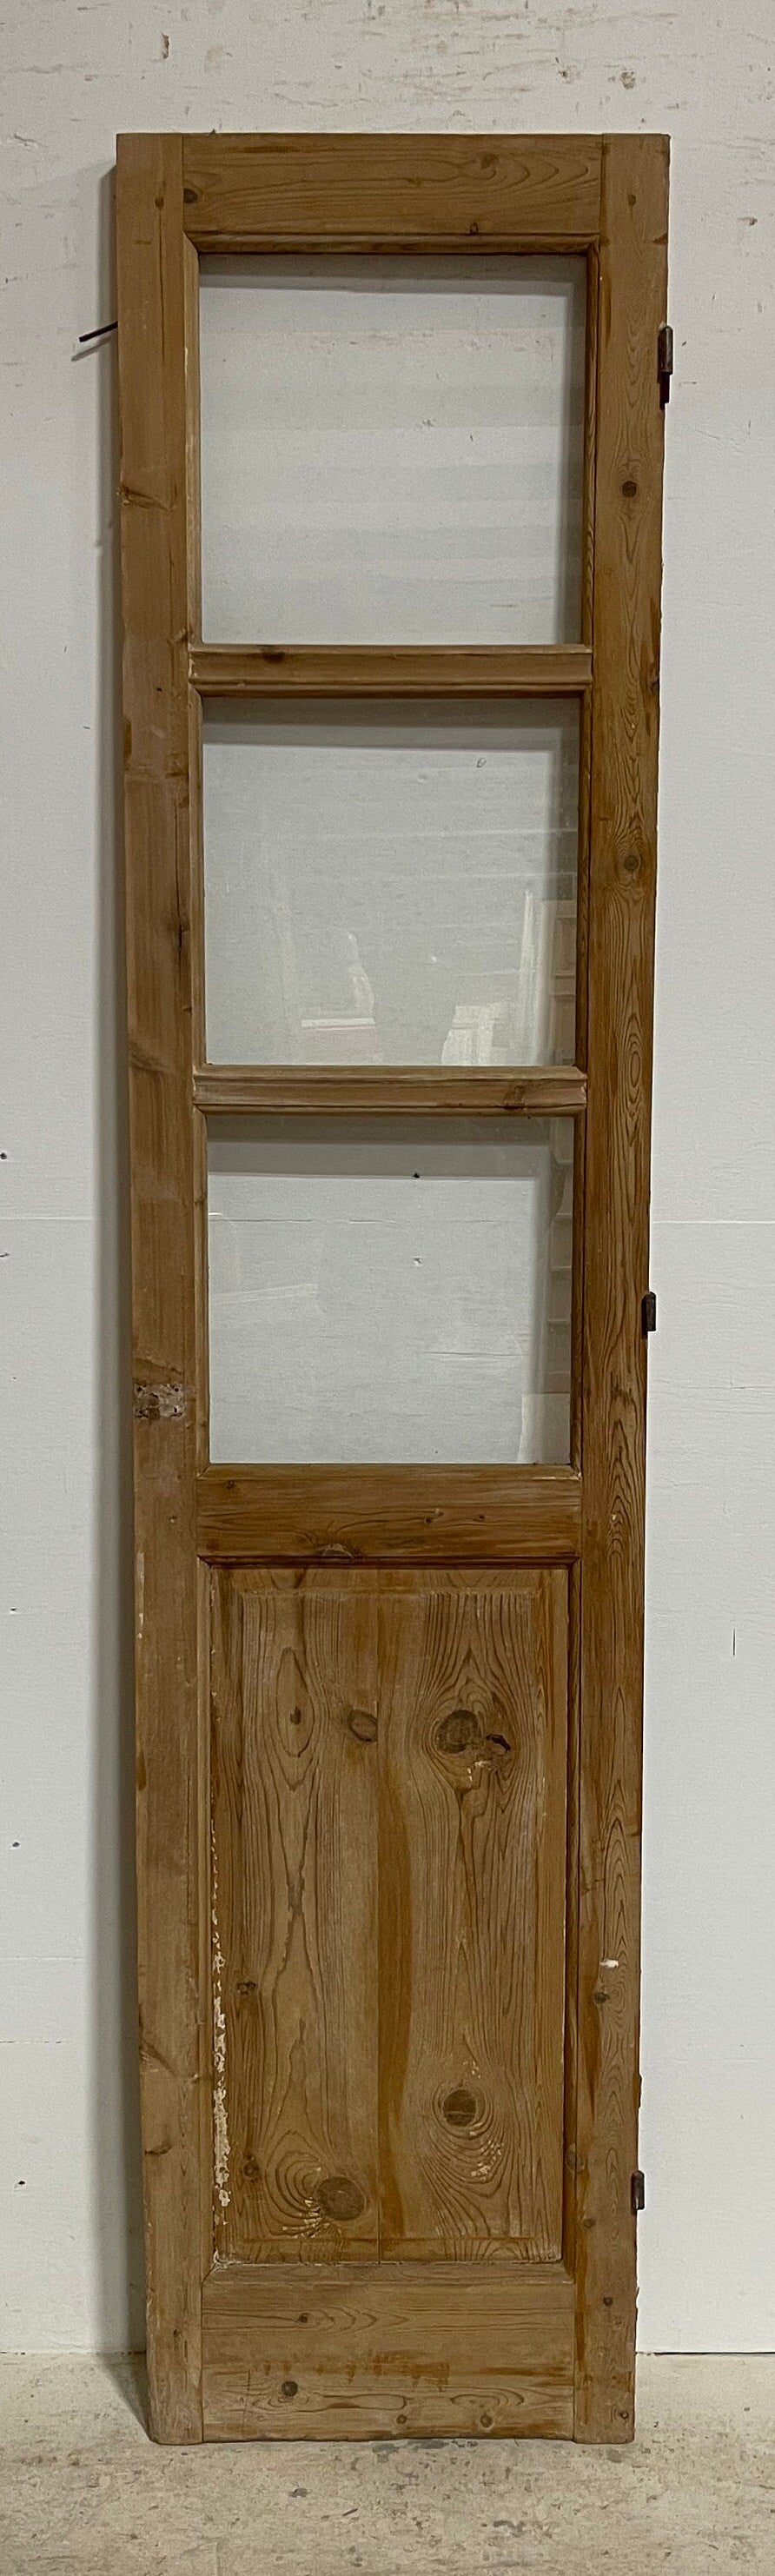 Antique French panel door with glass (86.5x19.25) G1506s